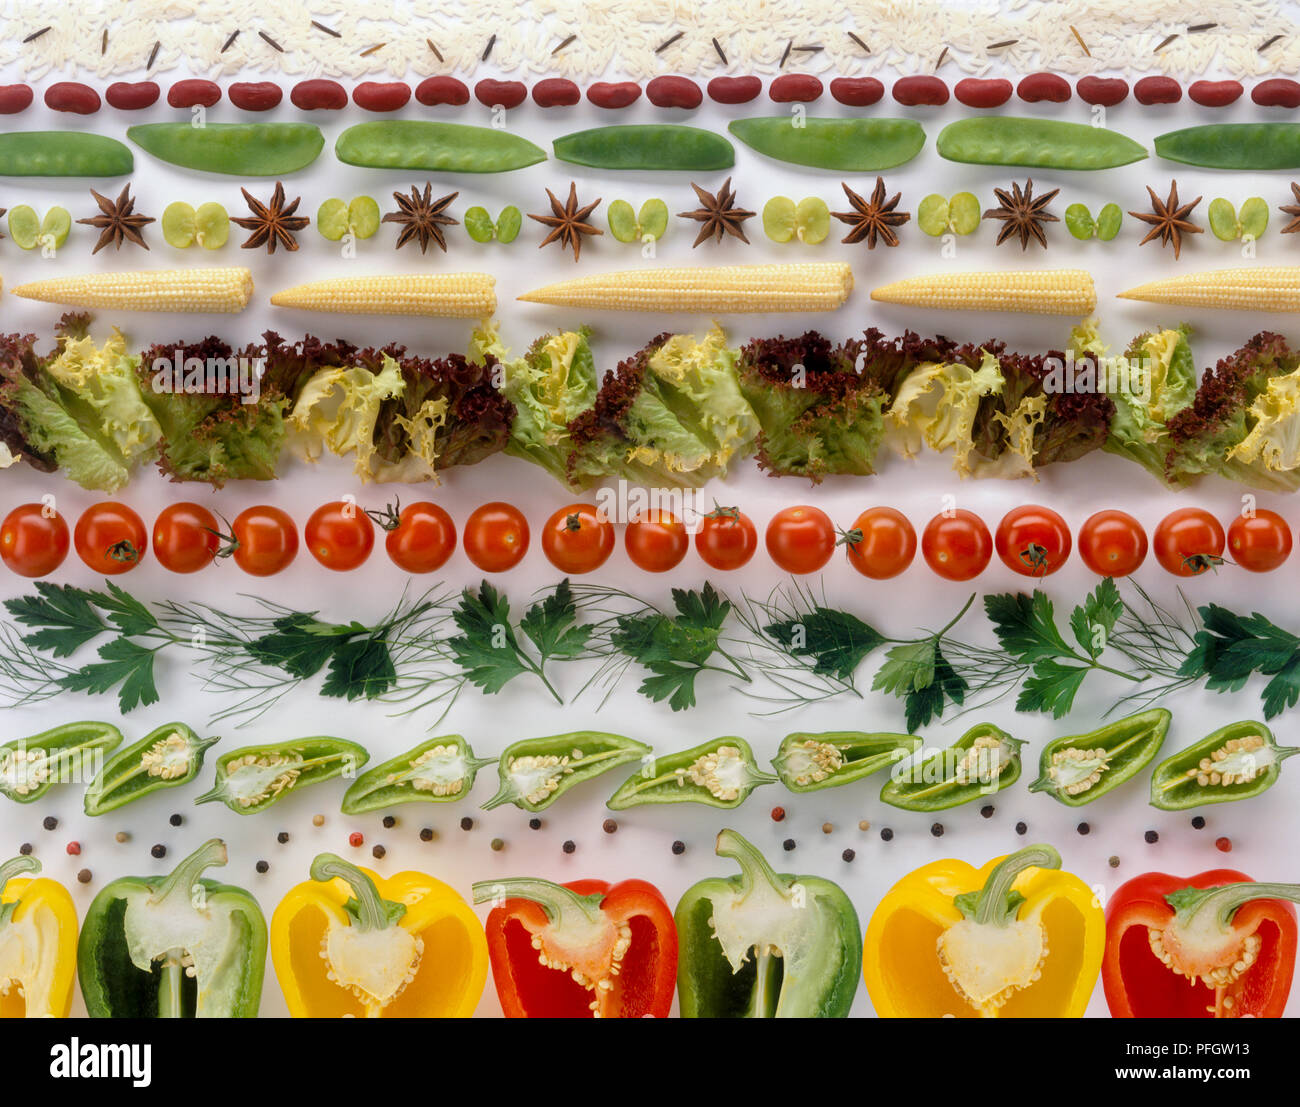 Lines of vegetables including snow peas, baby corns, lettuce, tomatoes and peppers Stock Photo